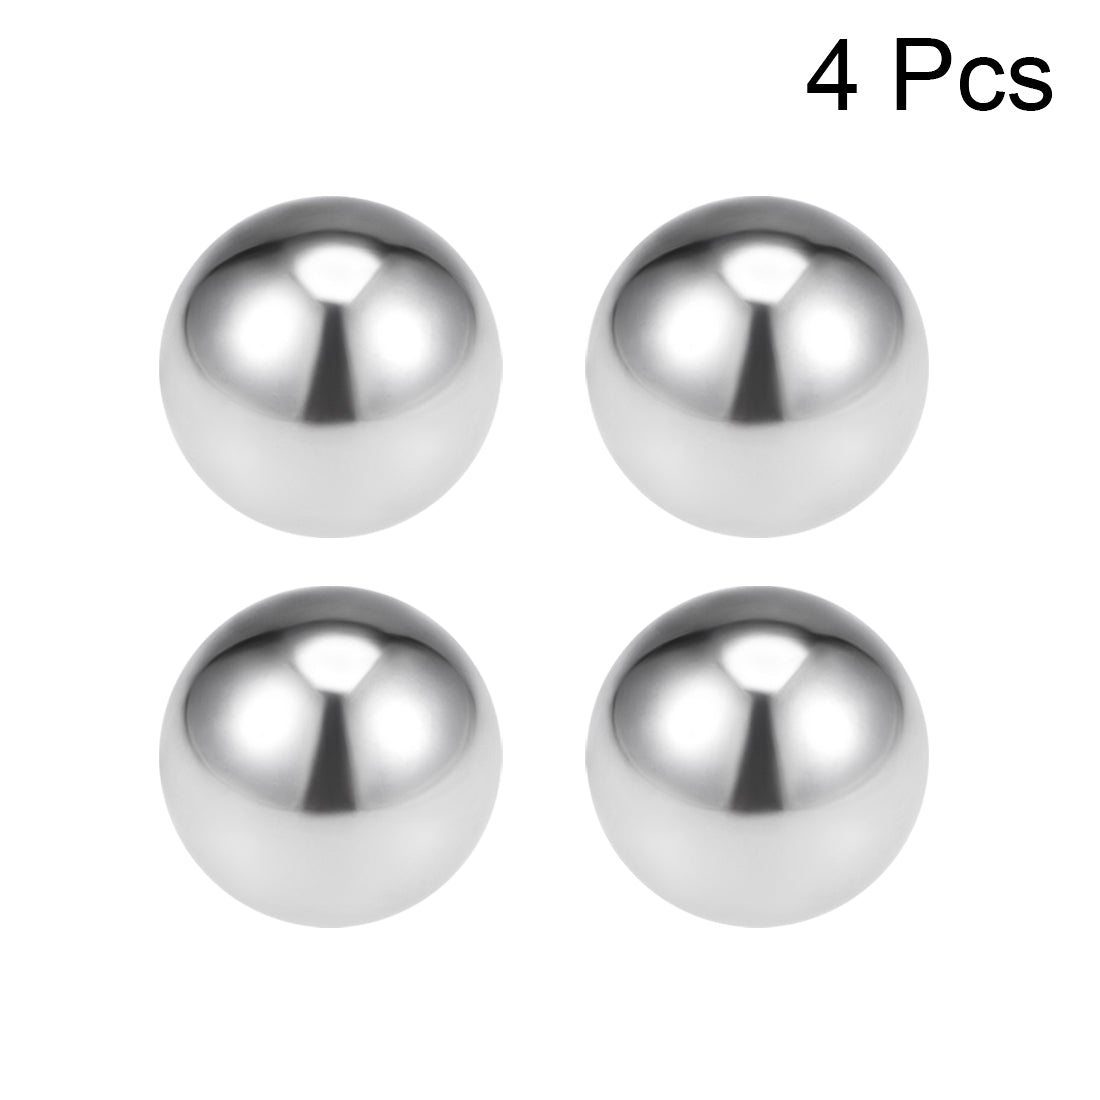 Uxcell Uxcell 30mm Bearing Balls 304 Stainless Steel G100 Precision Balls 4pcs